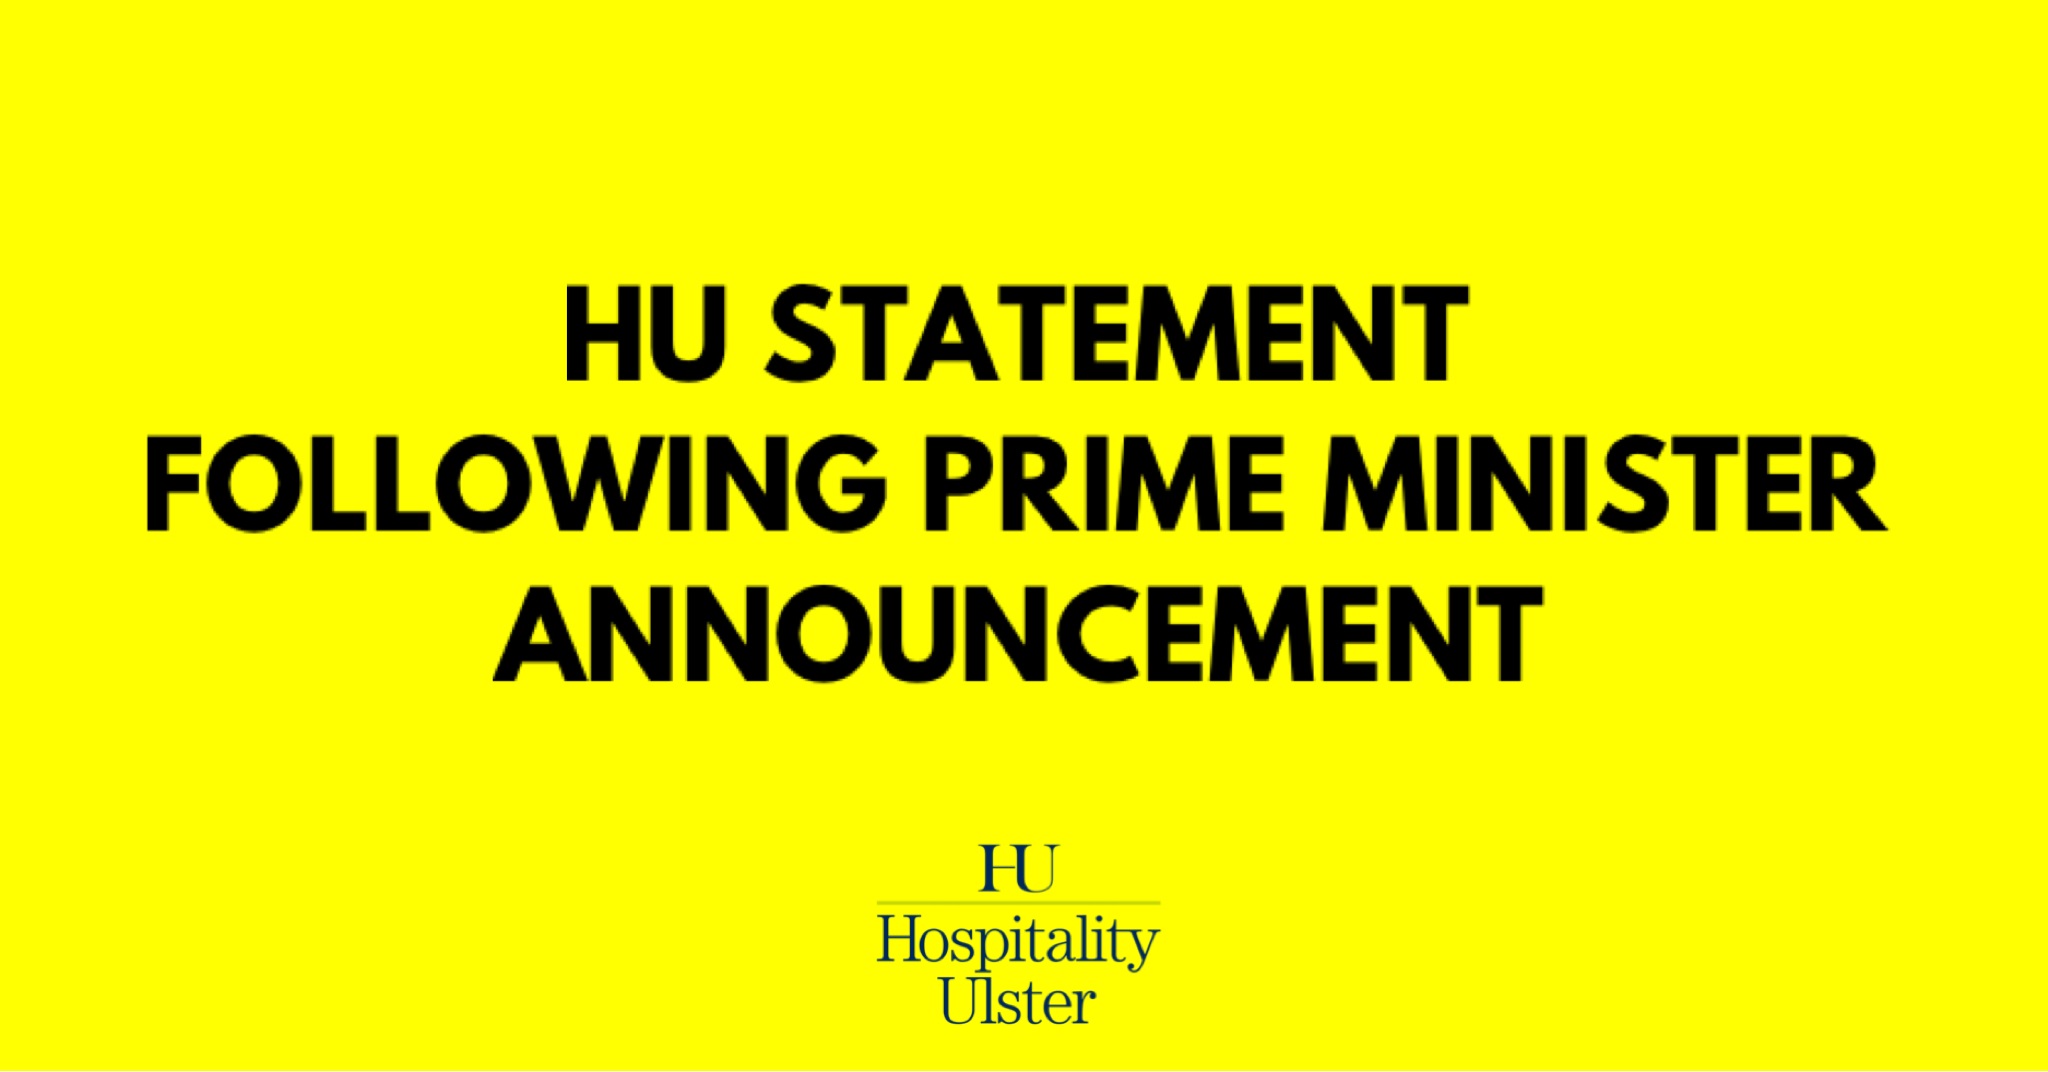 HU STATEMENT FOLLOWING PRIME MINISTER ANNOUNCEMENT